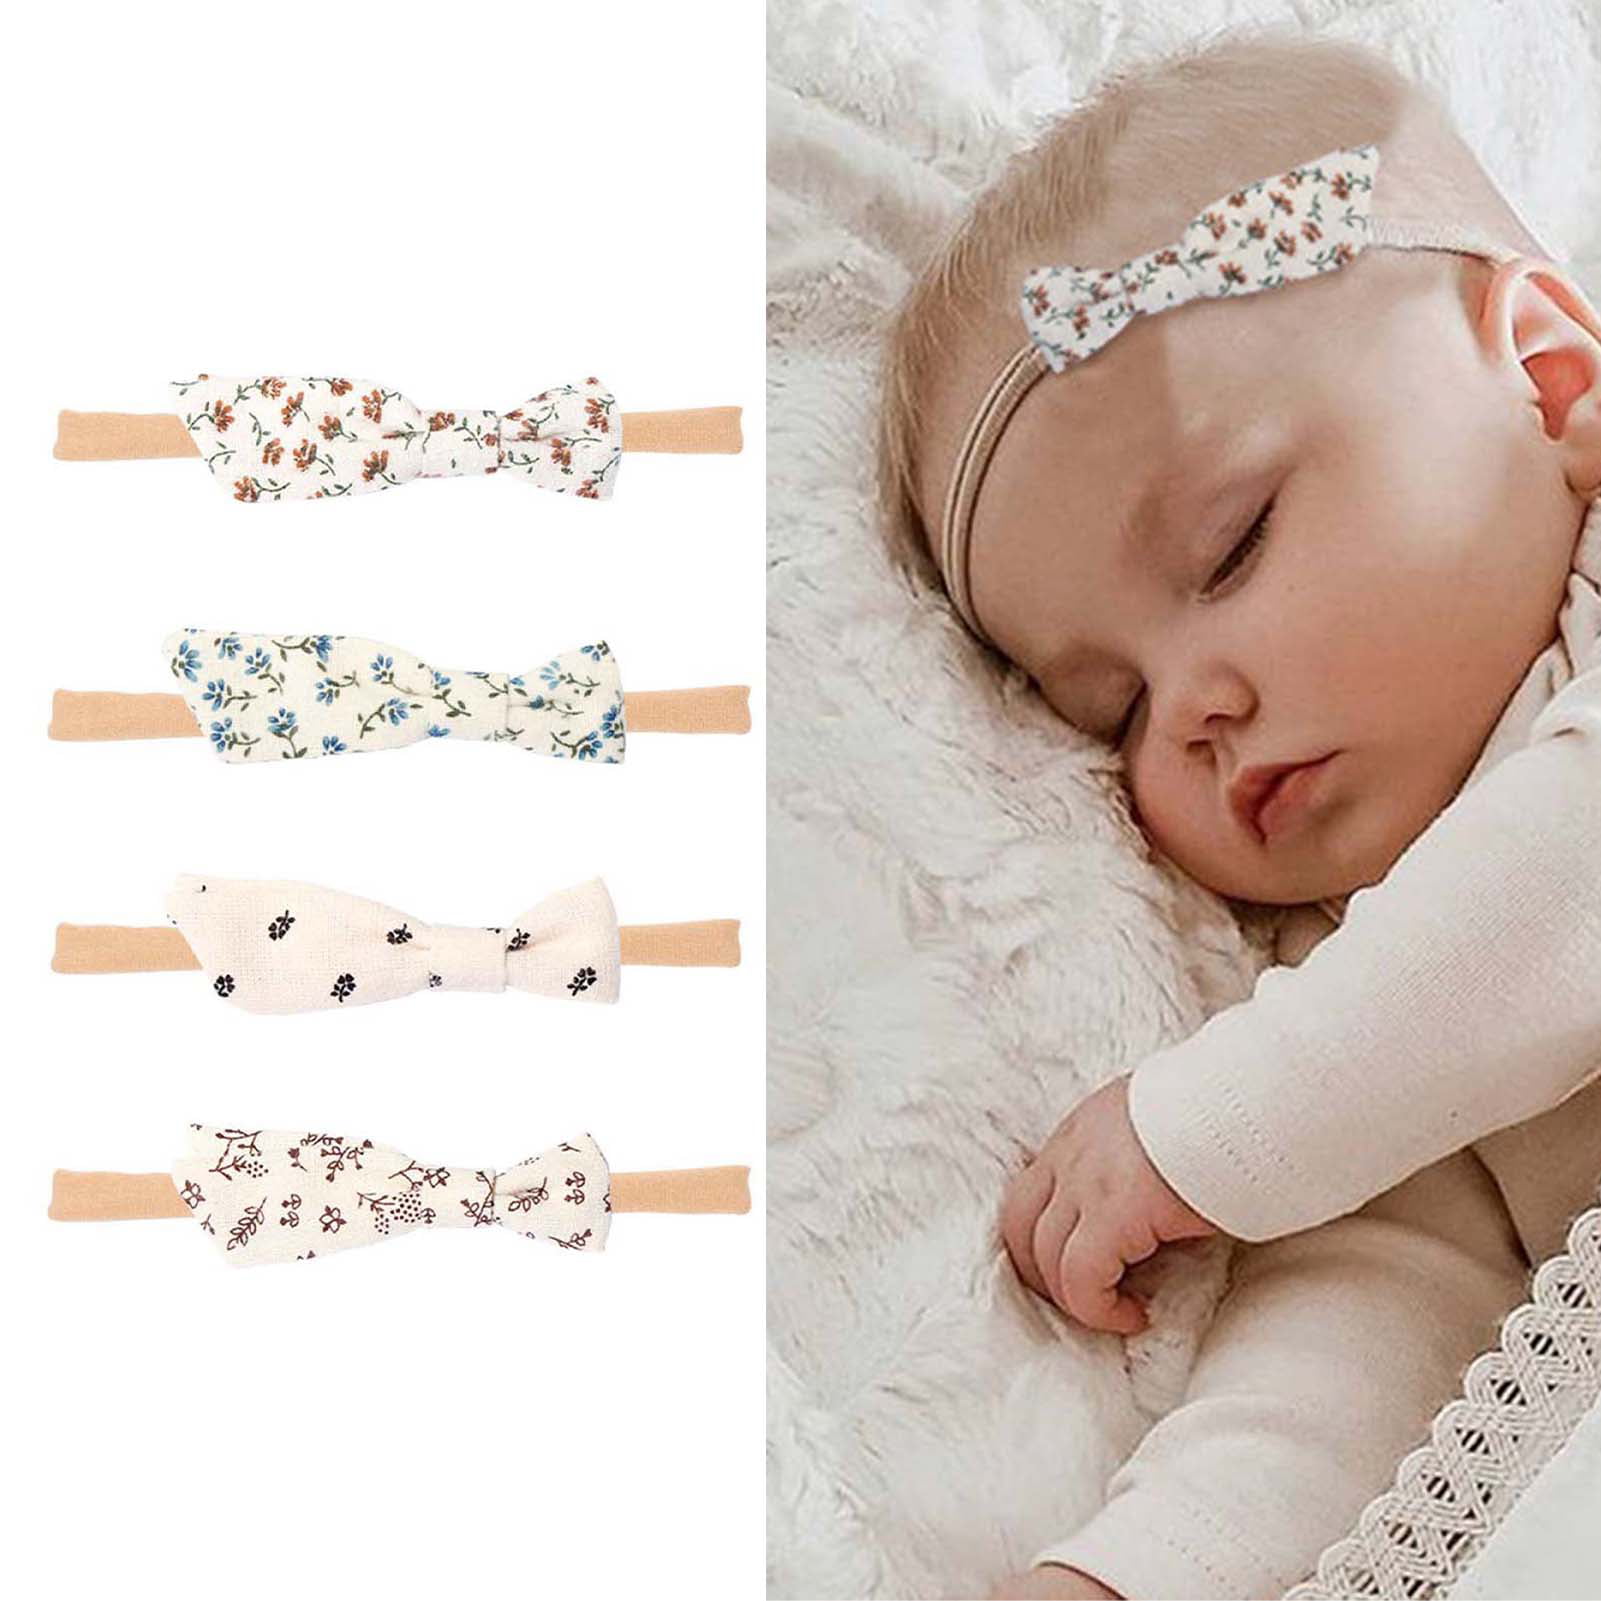 Mchoice Baby Knitting Infant Kids Girl Bowknot Hairband Phtography Props 